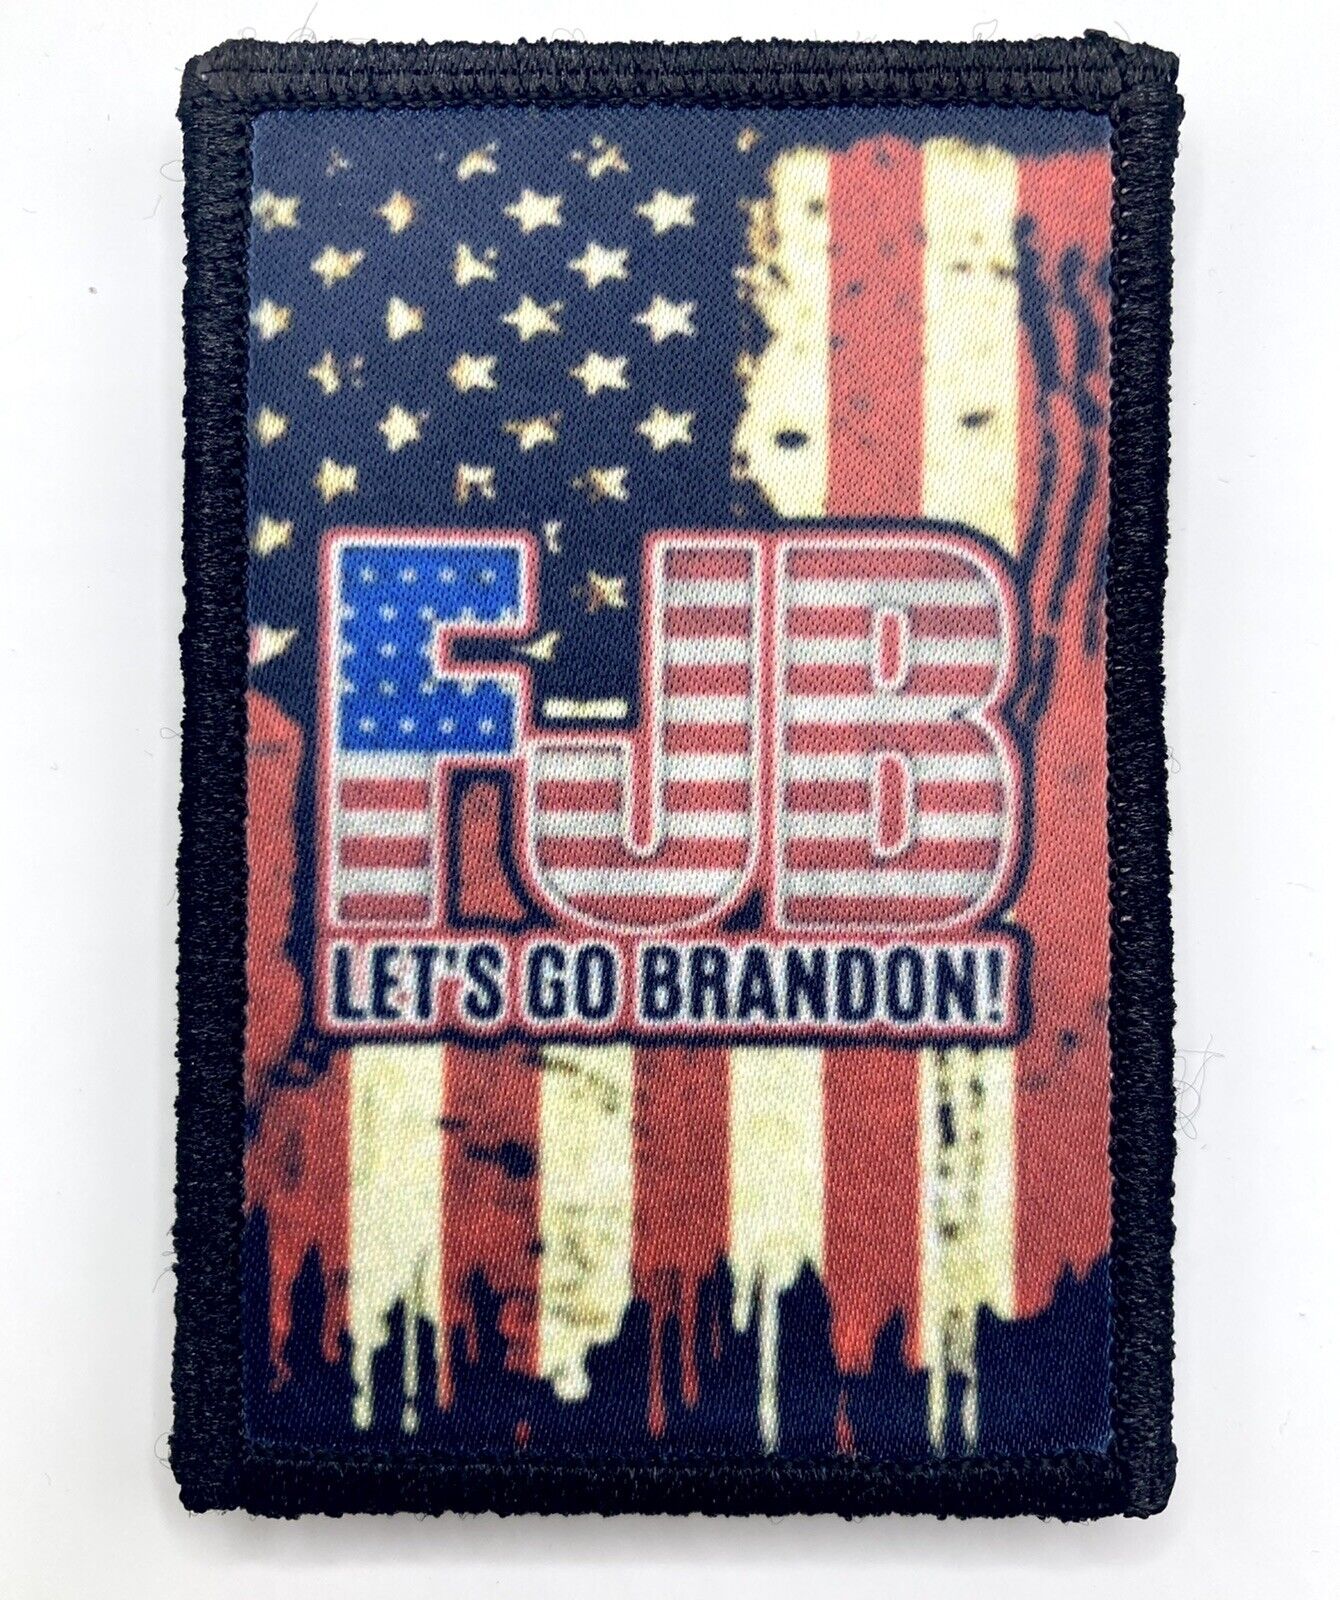 Let's Go Brandon FJB Morale Patch / Military Badge ARMY Tactical Hook & Loop 20